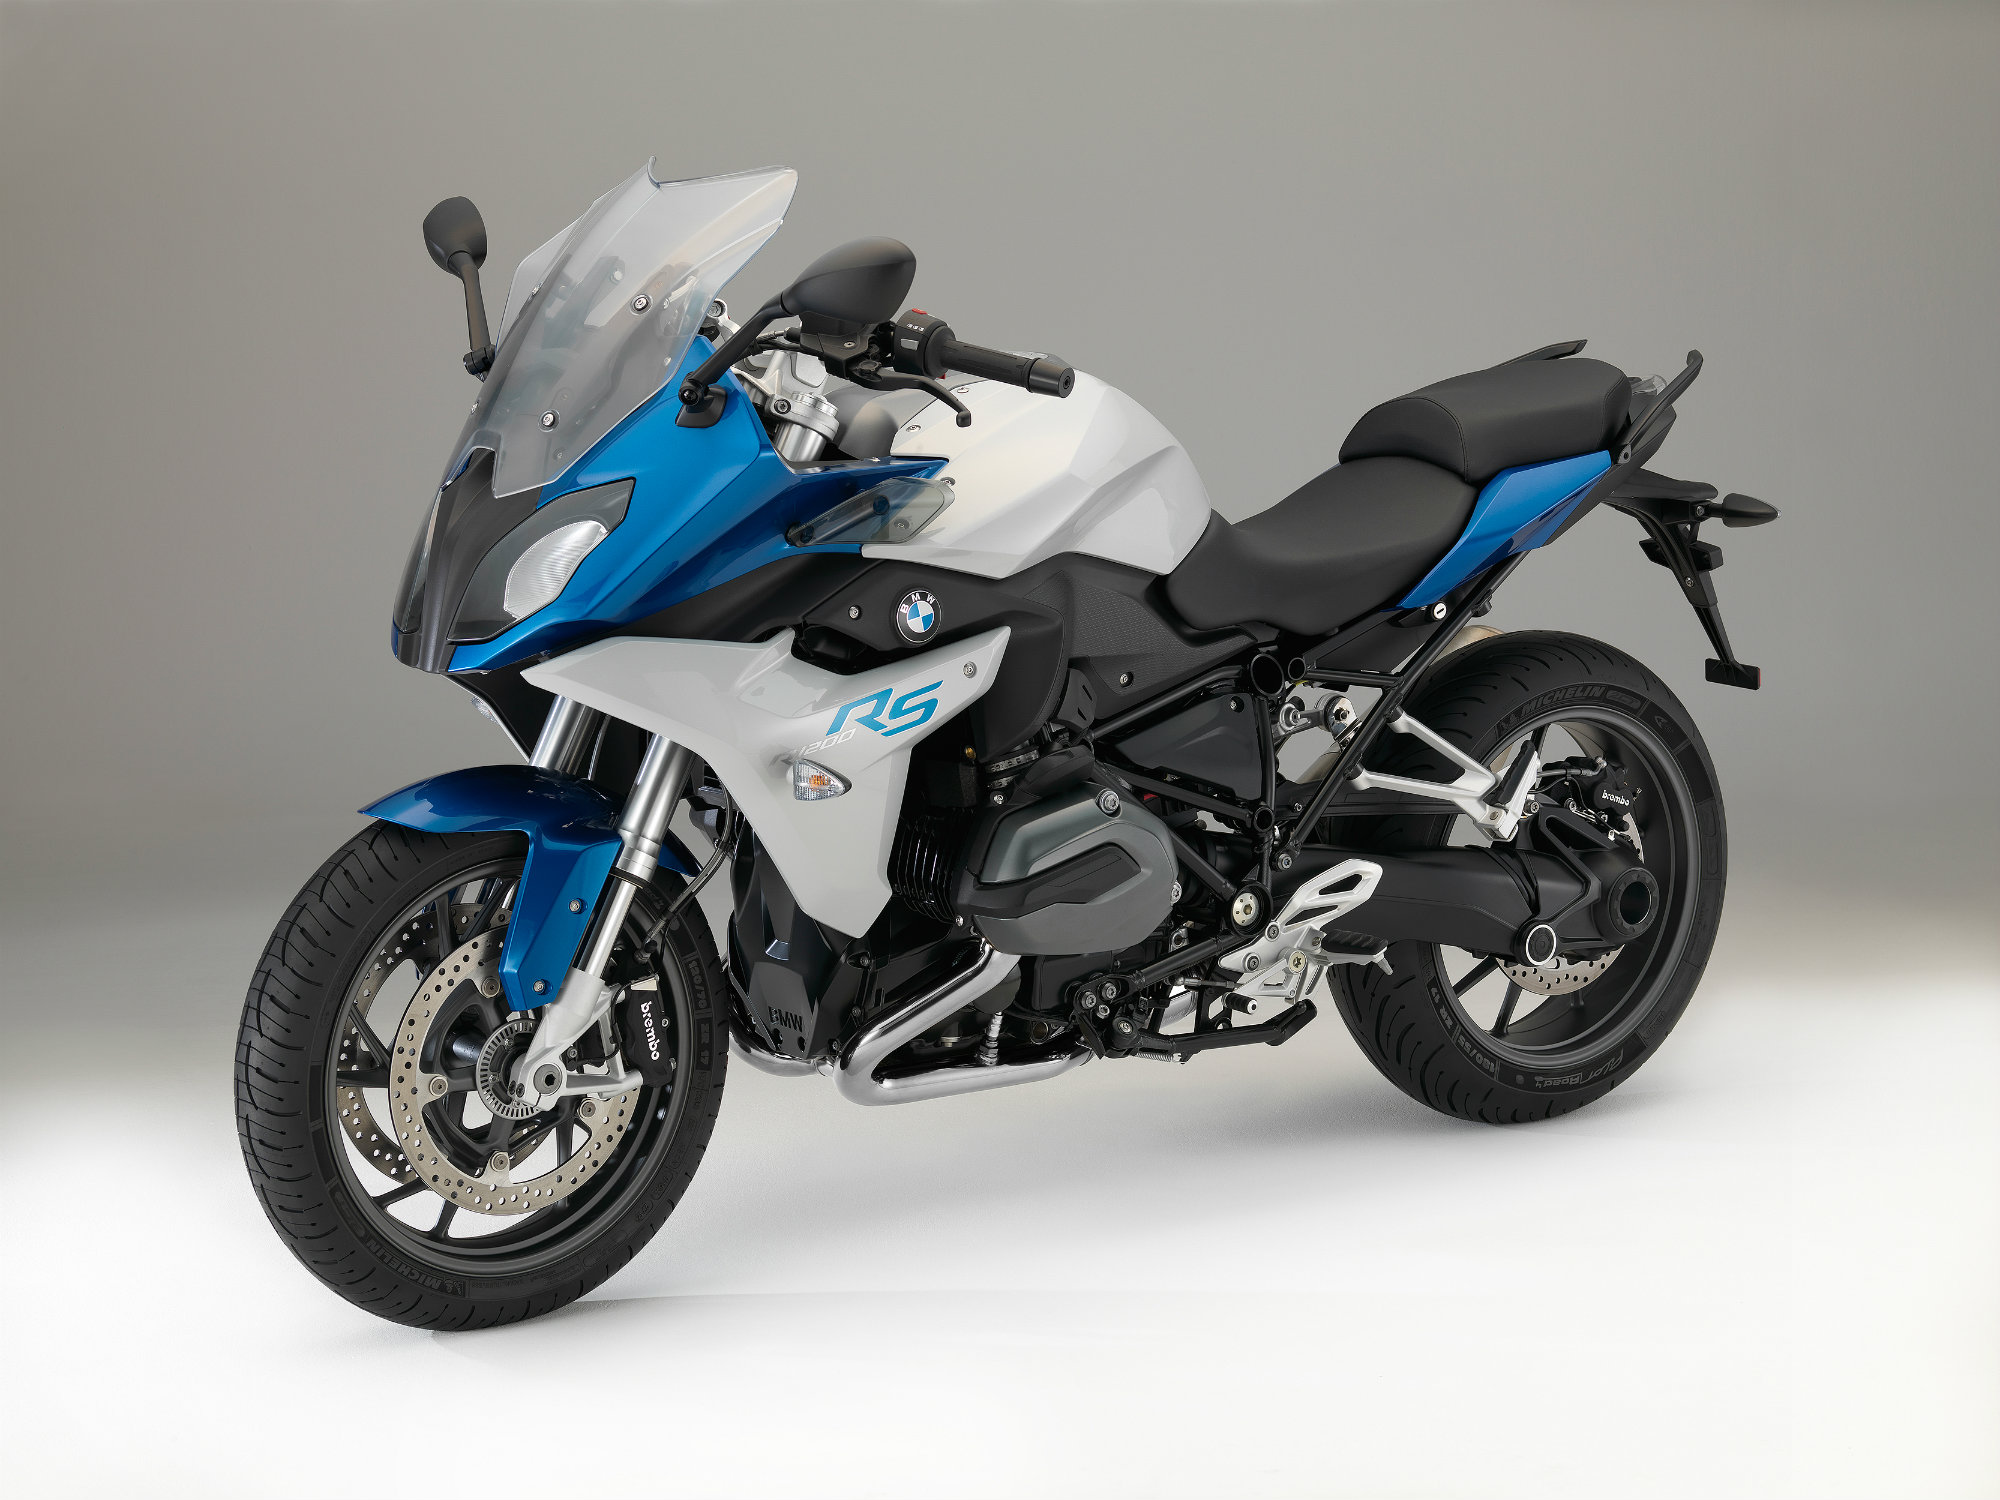 Intermot 2014: New BMW R1200 R and R1200 RS unveiled